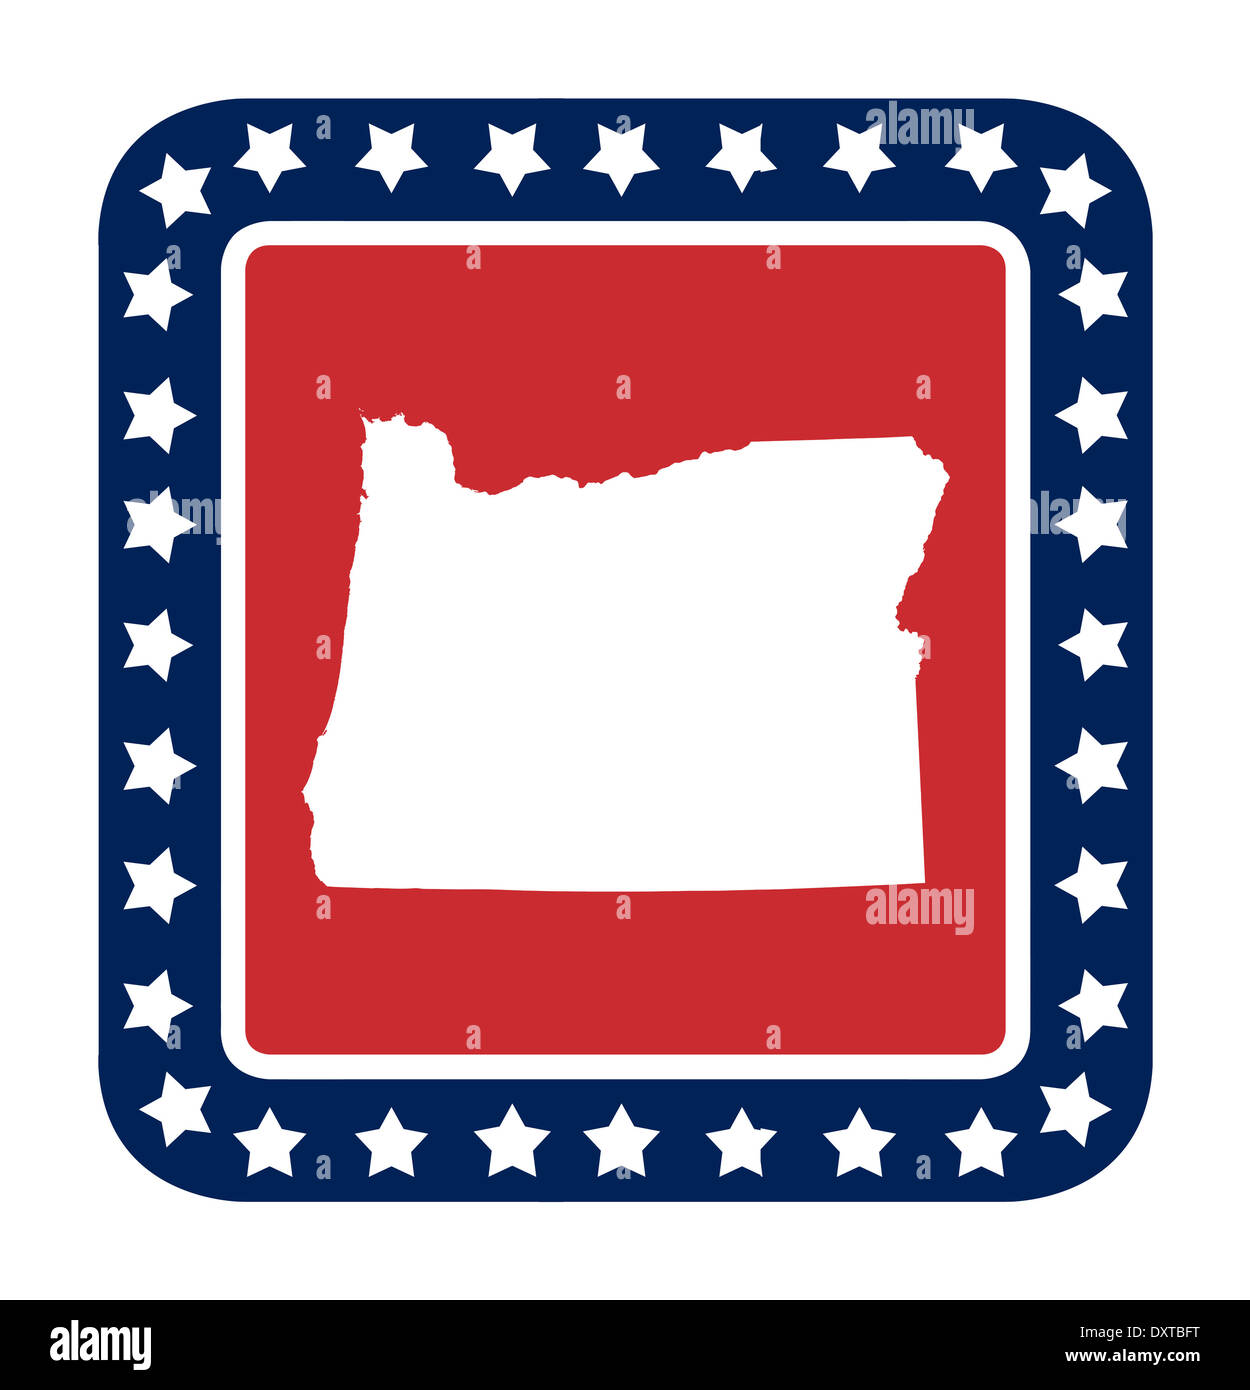 Oregon state button on American flag in flat web design style, isolated on white background. Stock Photo